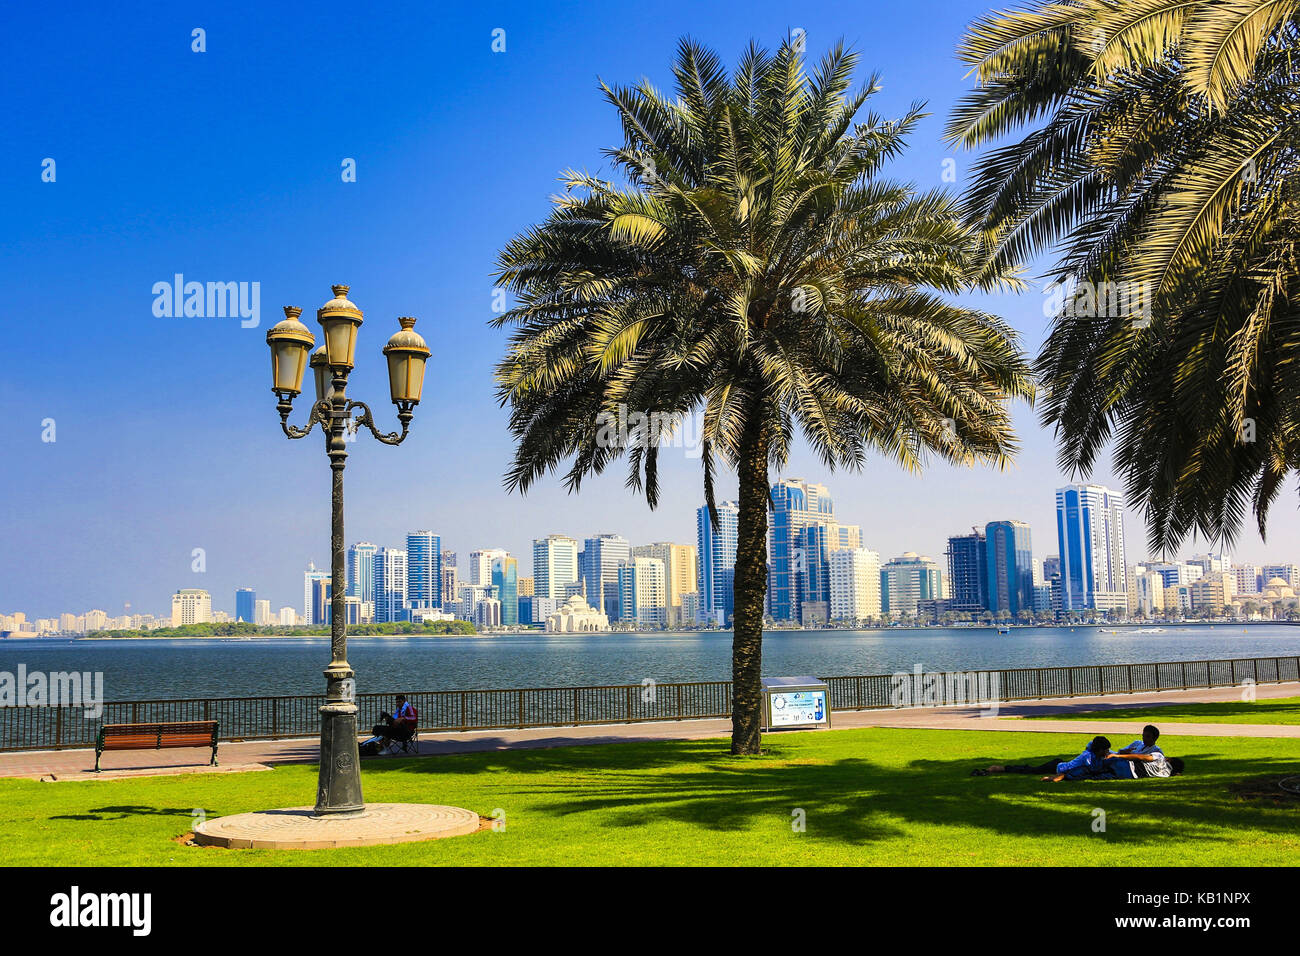 Tourists in a park, Khaued Lagoon, Sharjah, Stock Photo